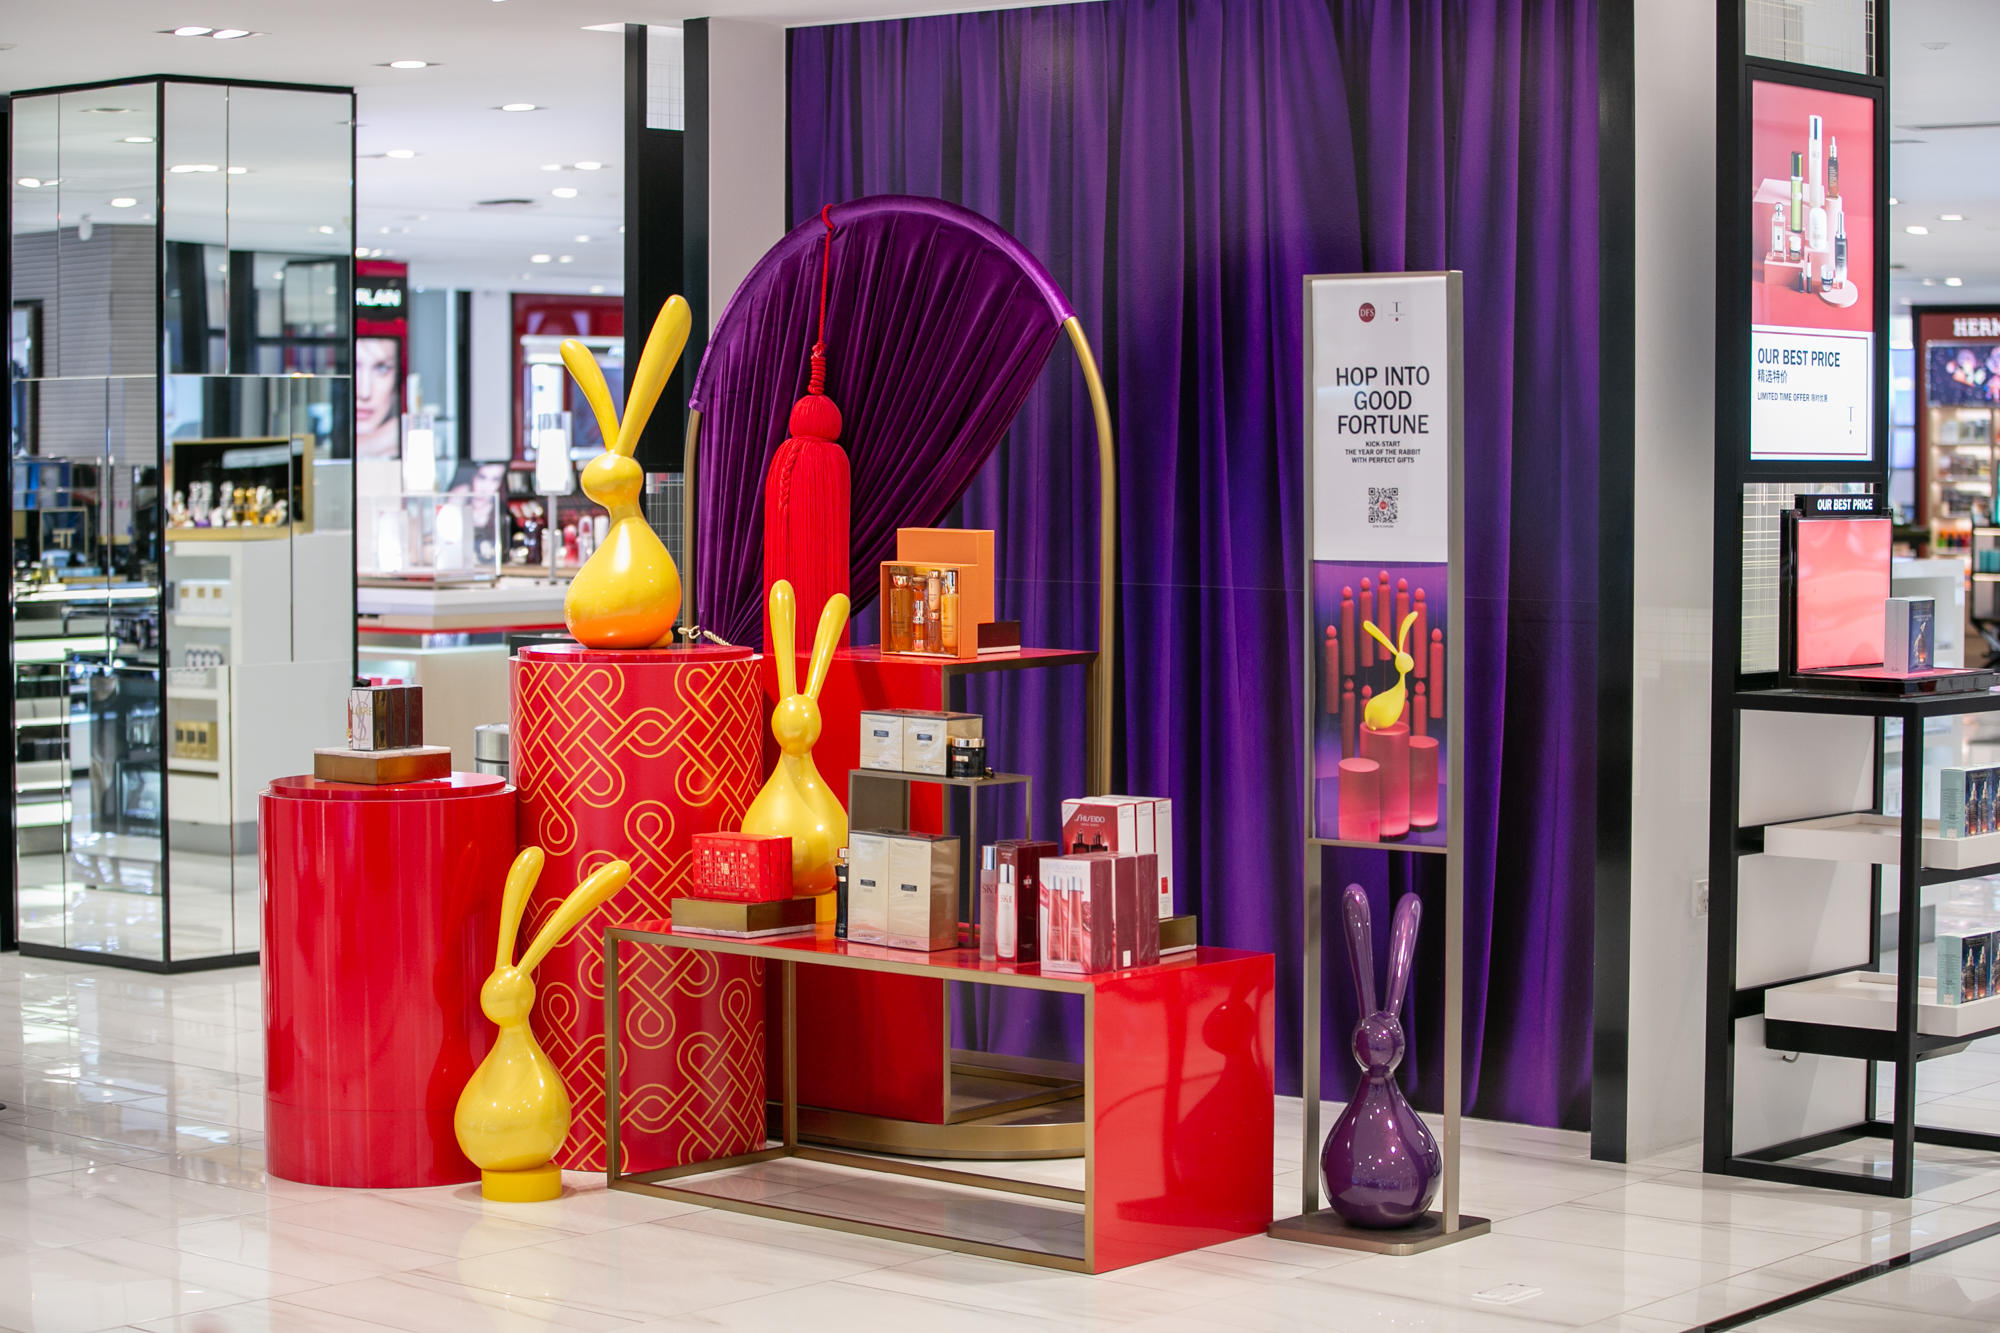 Images T Galleria By DFS, Sydney